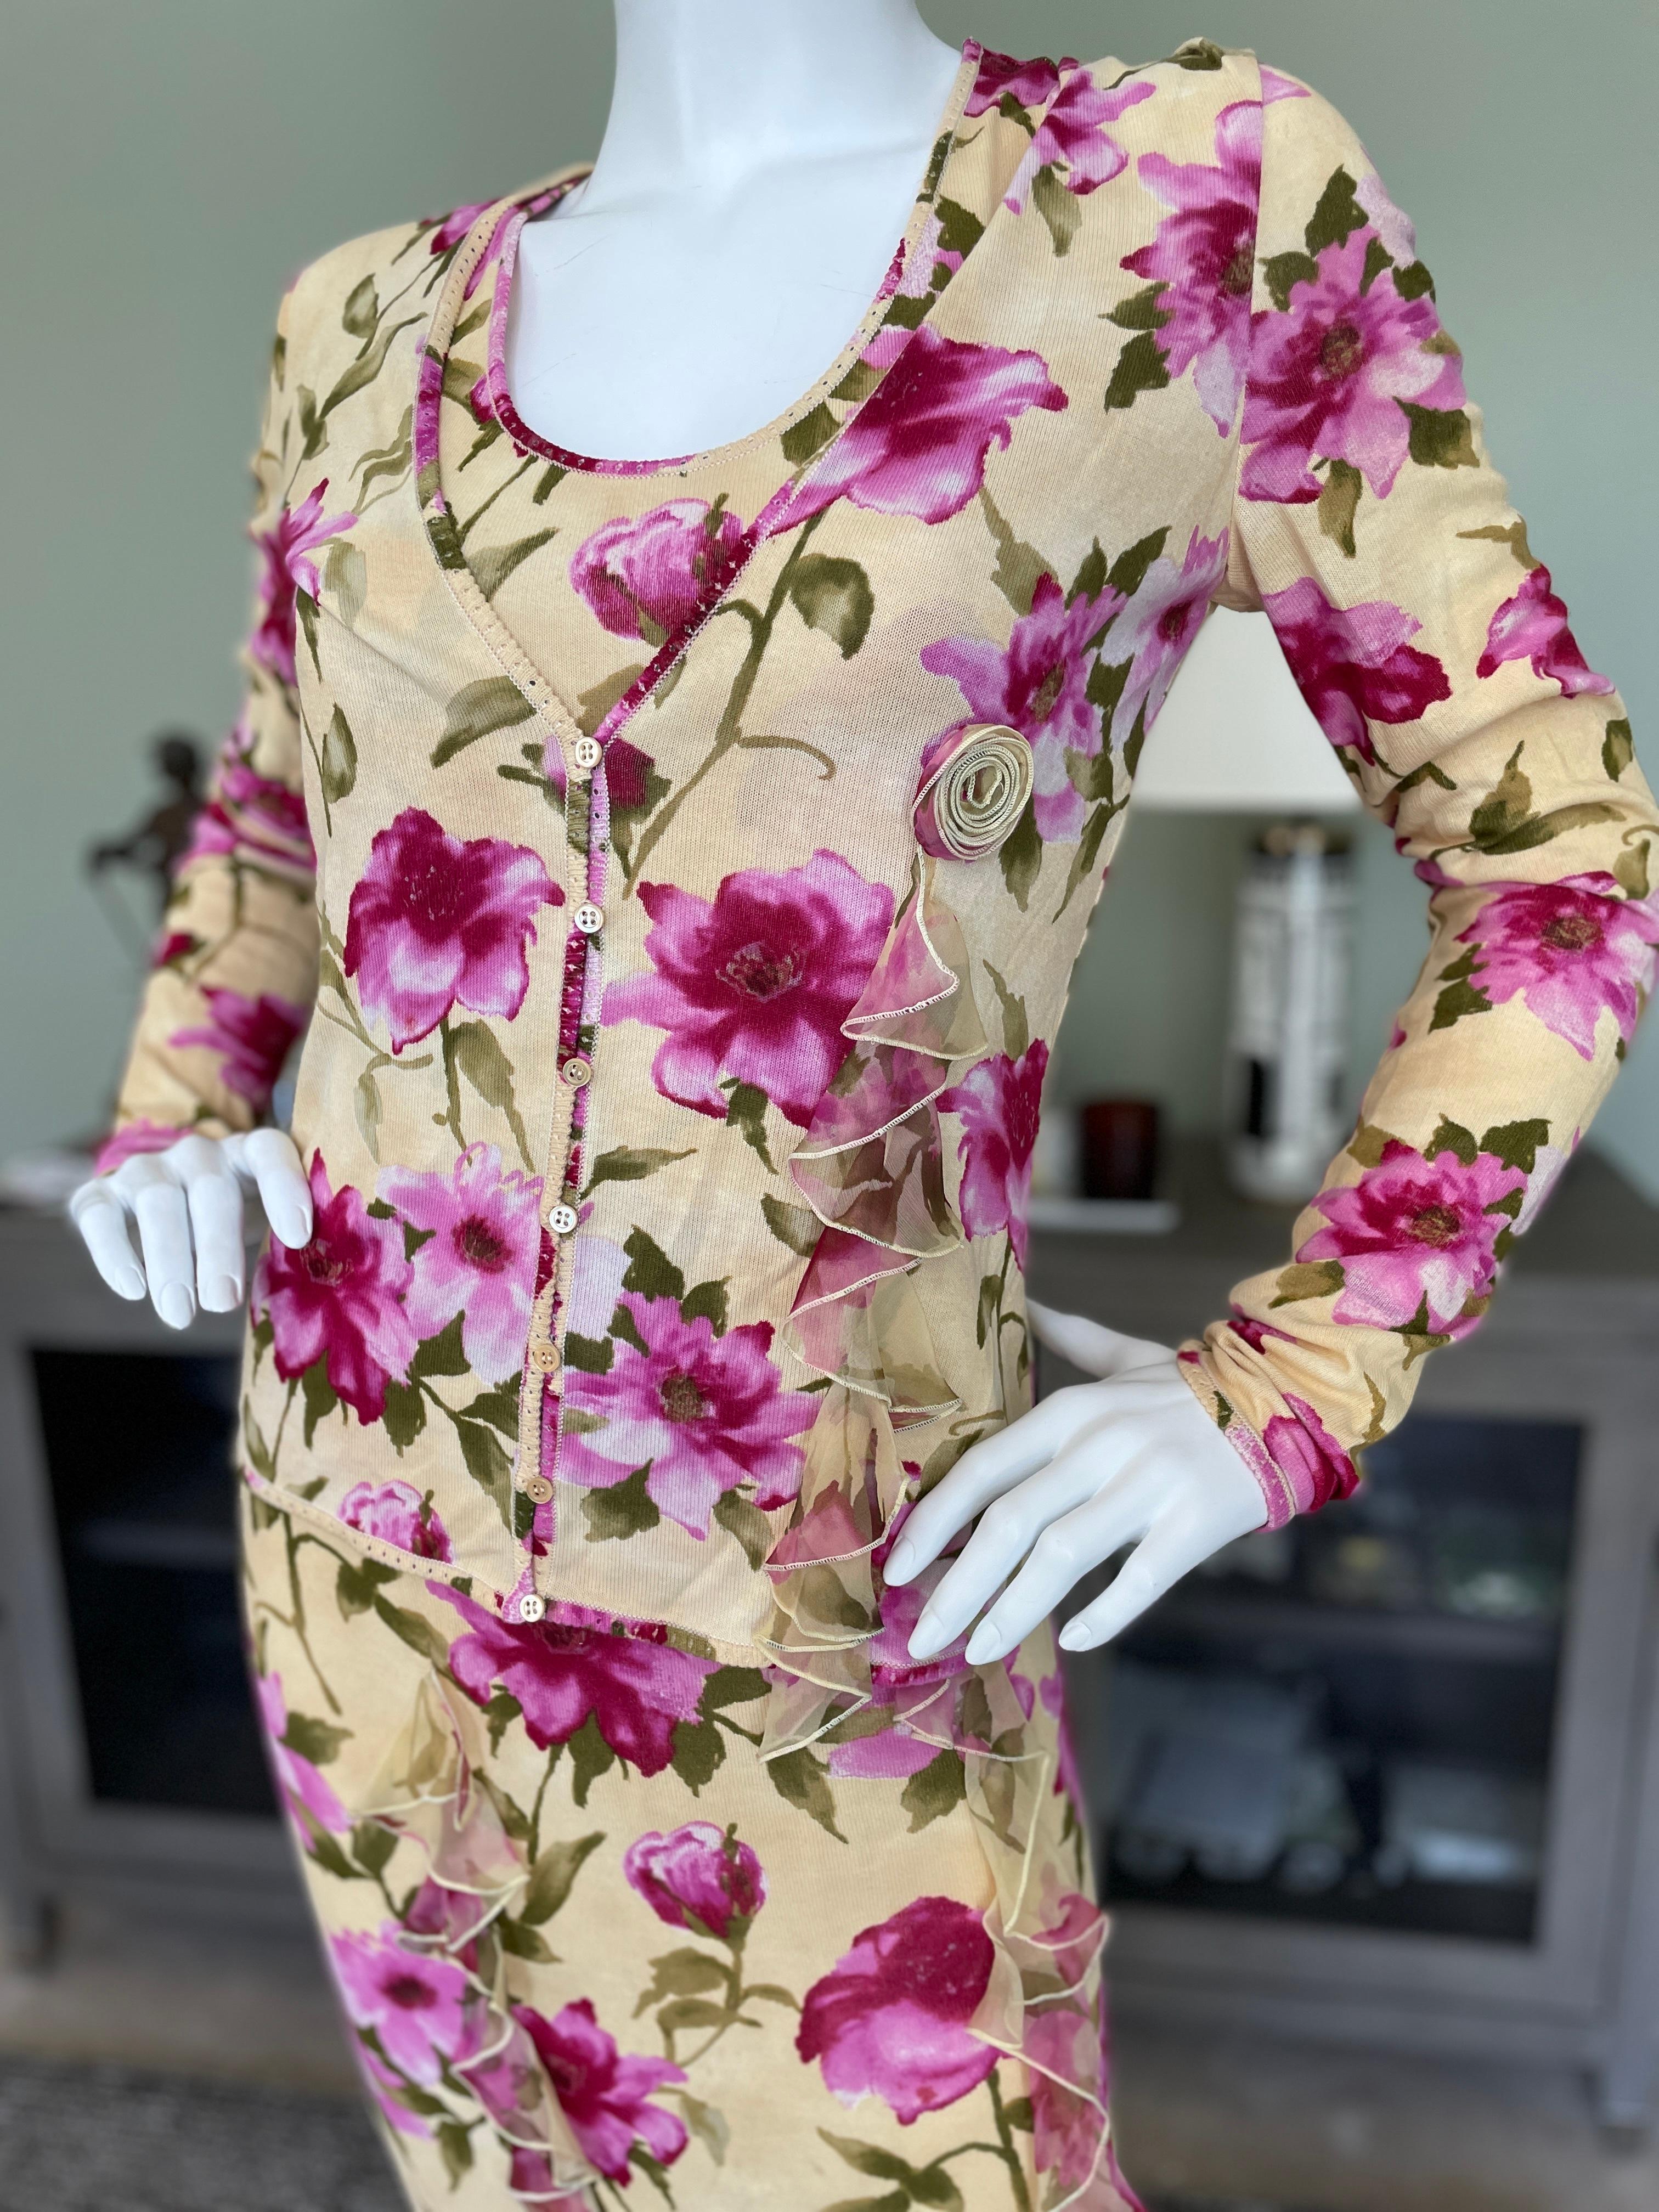 Beige John Galliano Vintage Floral Print Cocktail Dress with Matching Cardigan Sweater For Sale